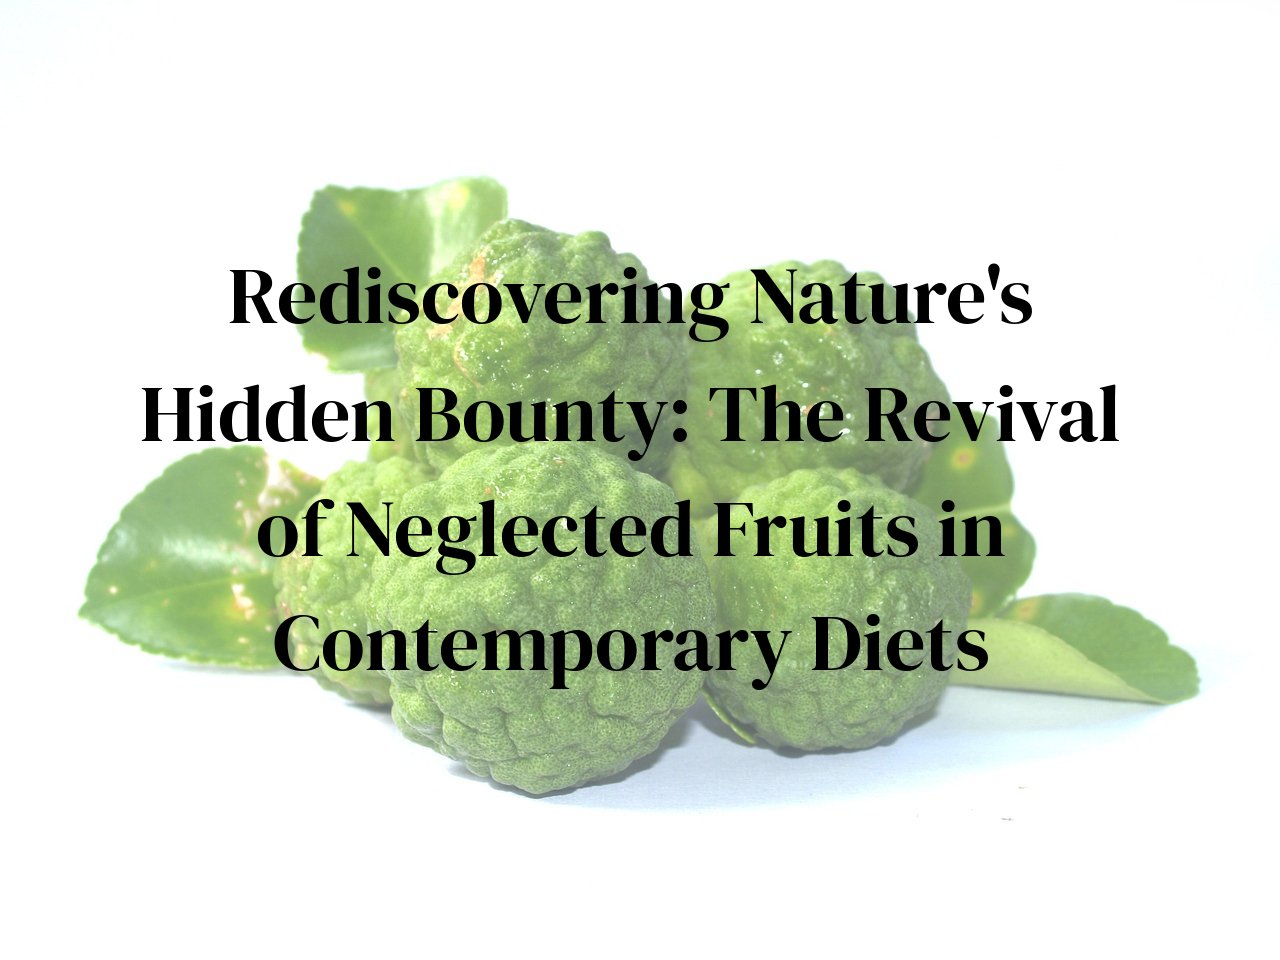 Rediscovering Nature's Hidden Bounty: The Revival of Neglected Fruits in Contemporary Diets